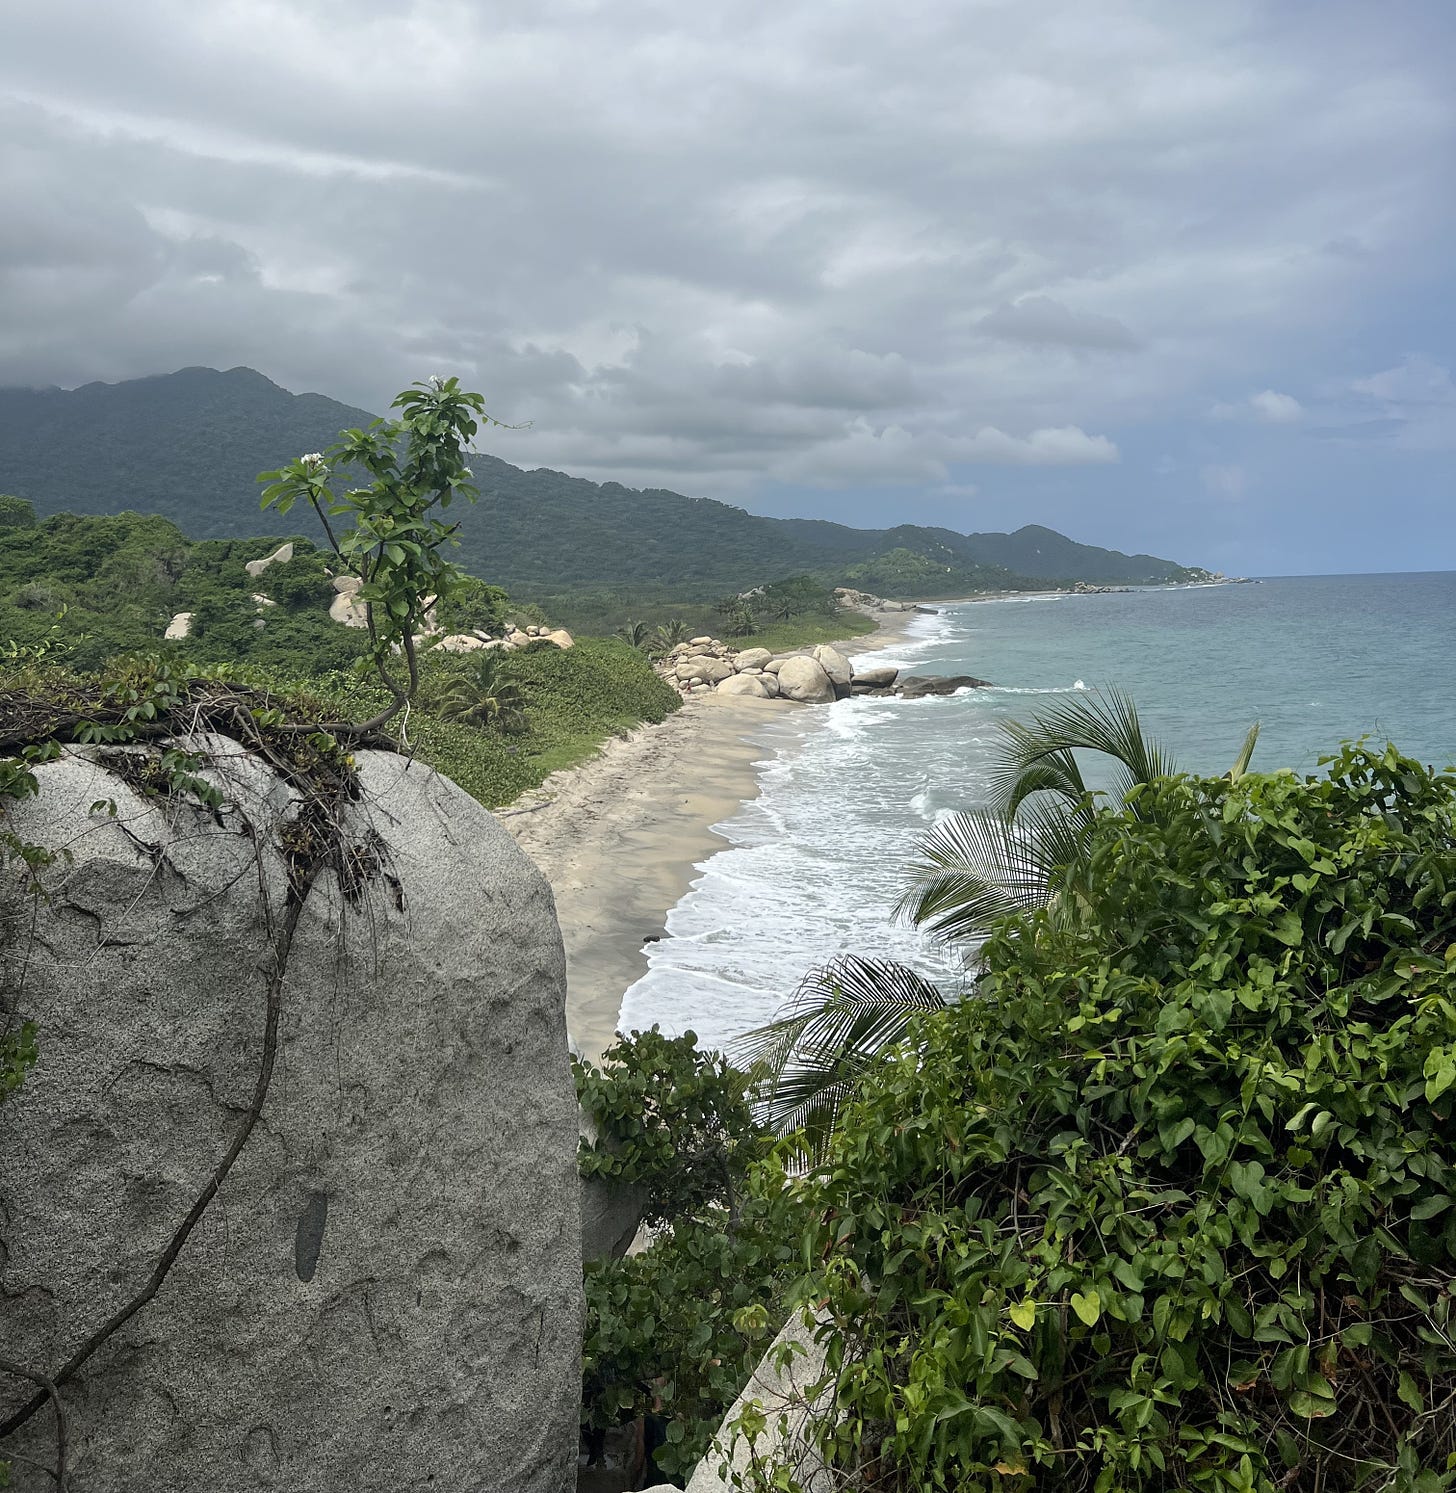 Views from a hike in Tayrona National Park in Colombia this past week.